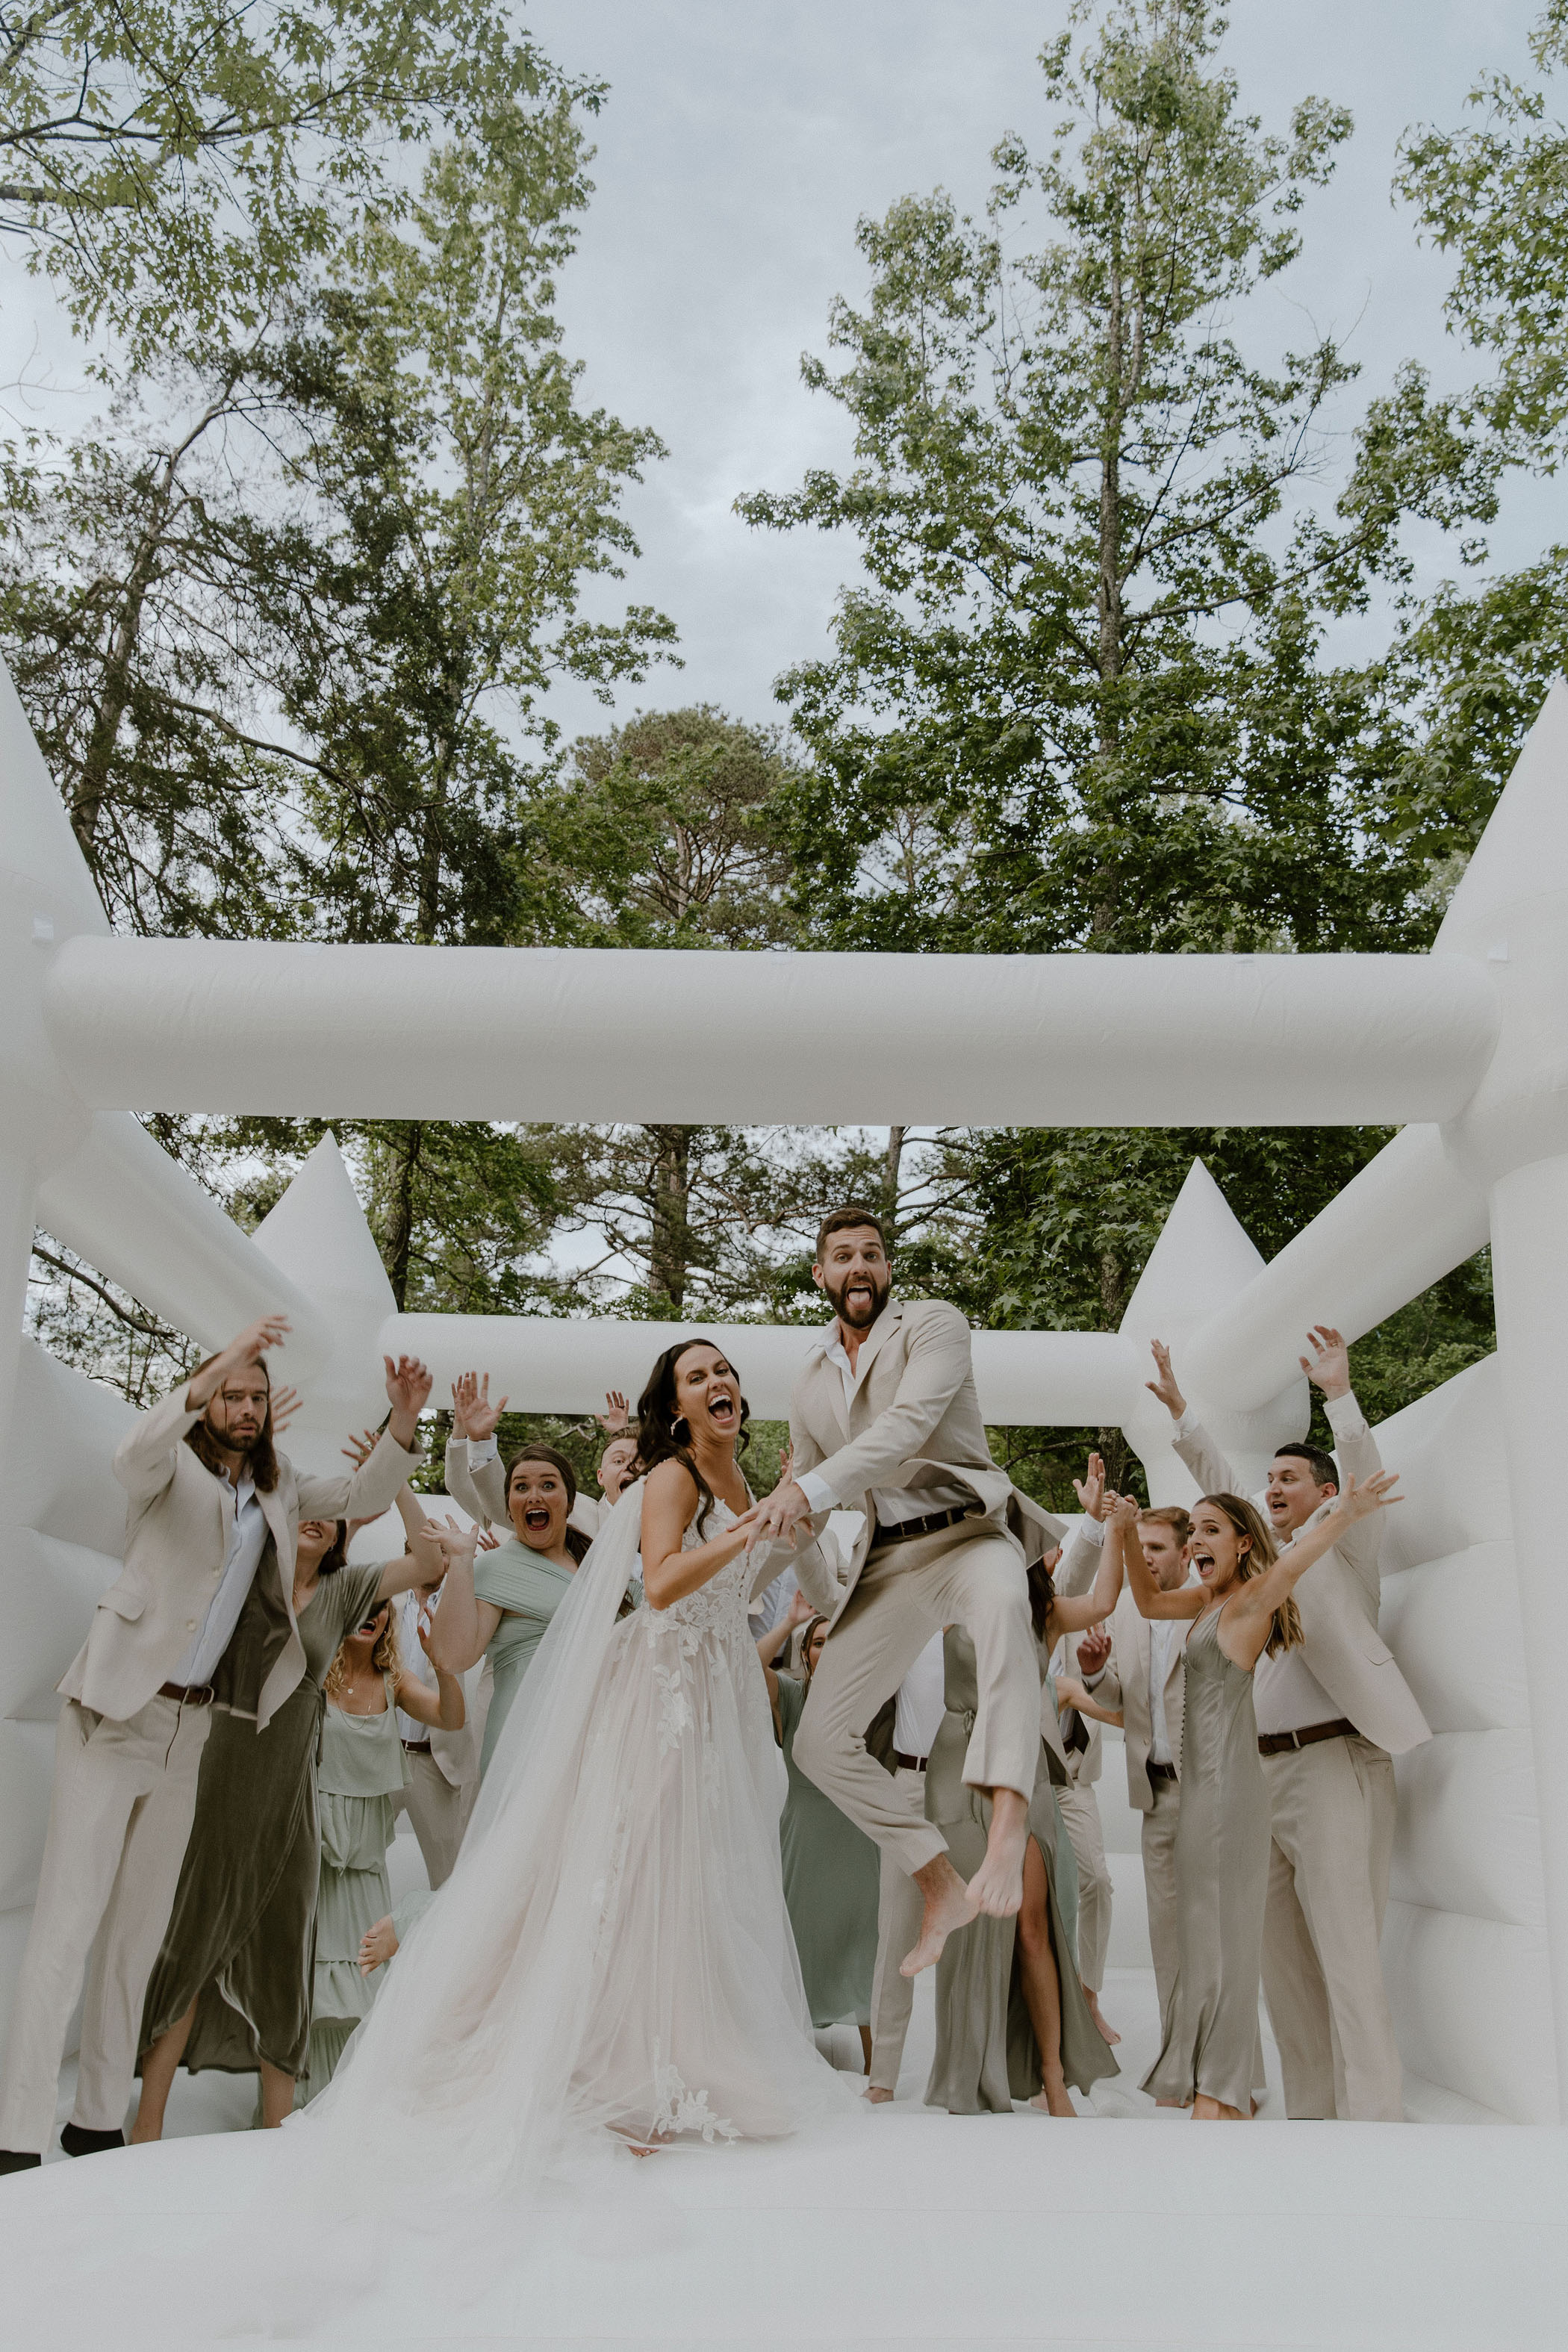 What's Better Than a Wedding in a Forest? A Wedding With a Bounce House, Of Course! - Green Wedding Shoes